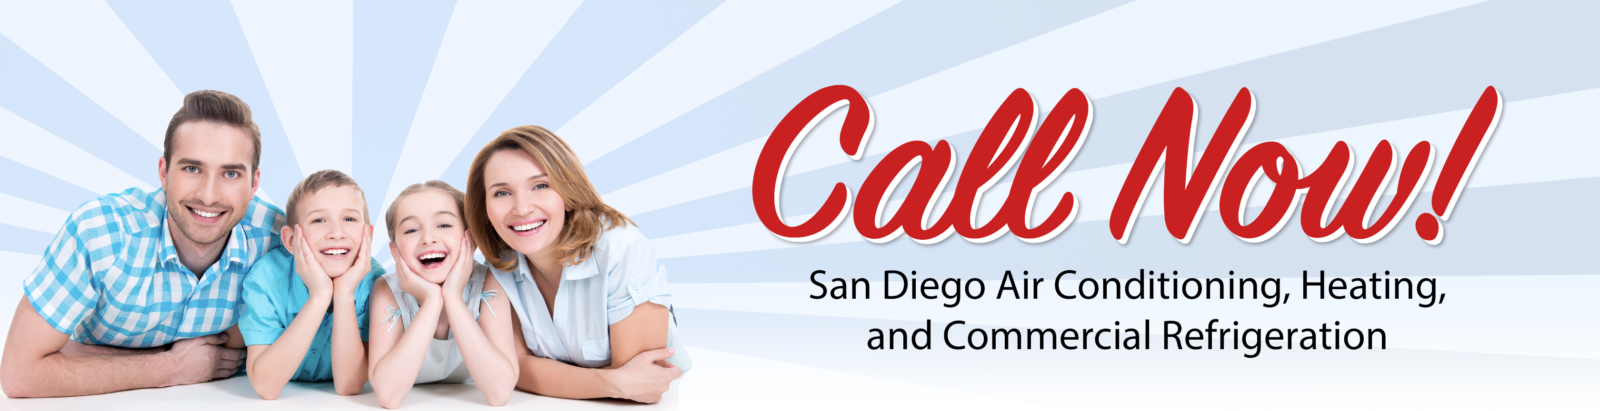 San Diego Air Conditioning, Heating, and Commercial Refrigeration